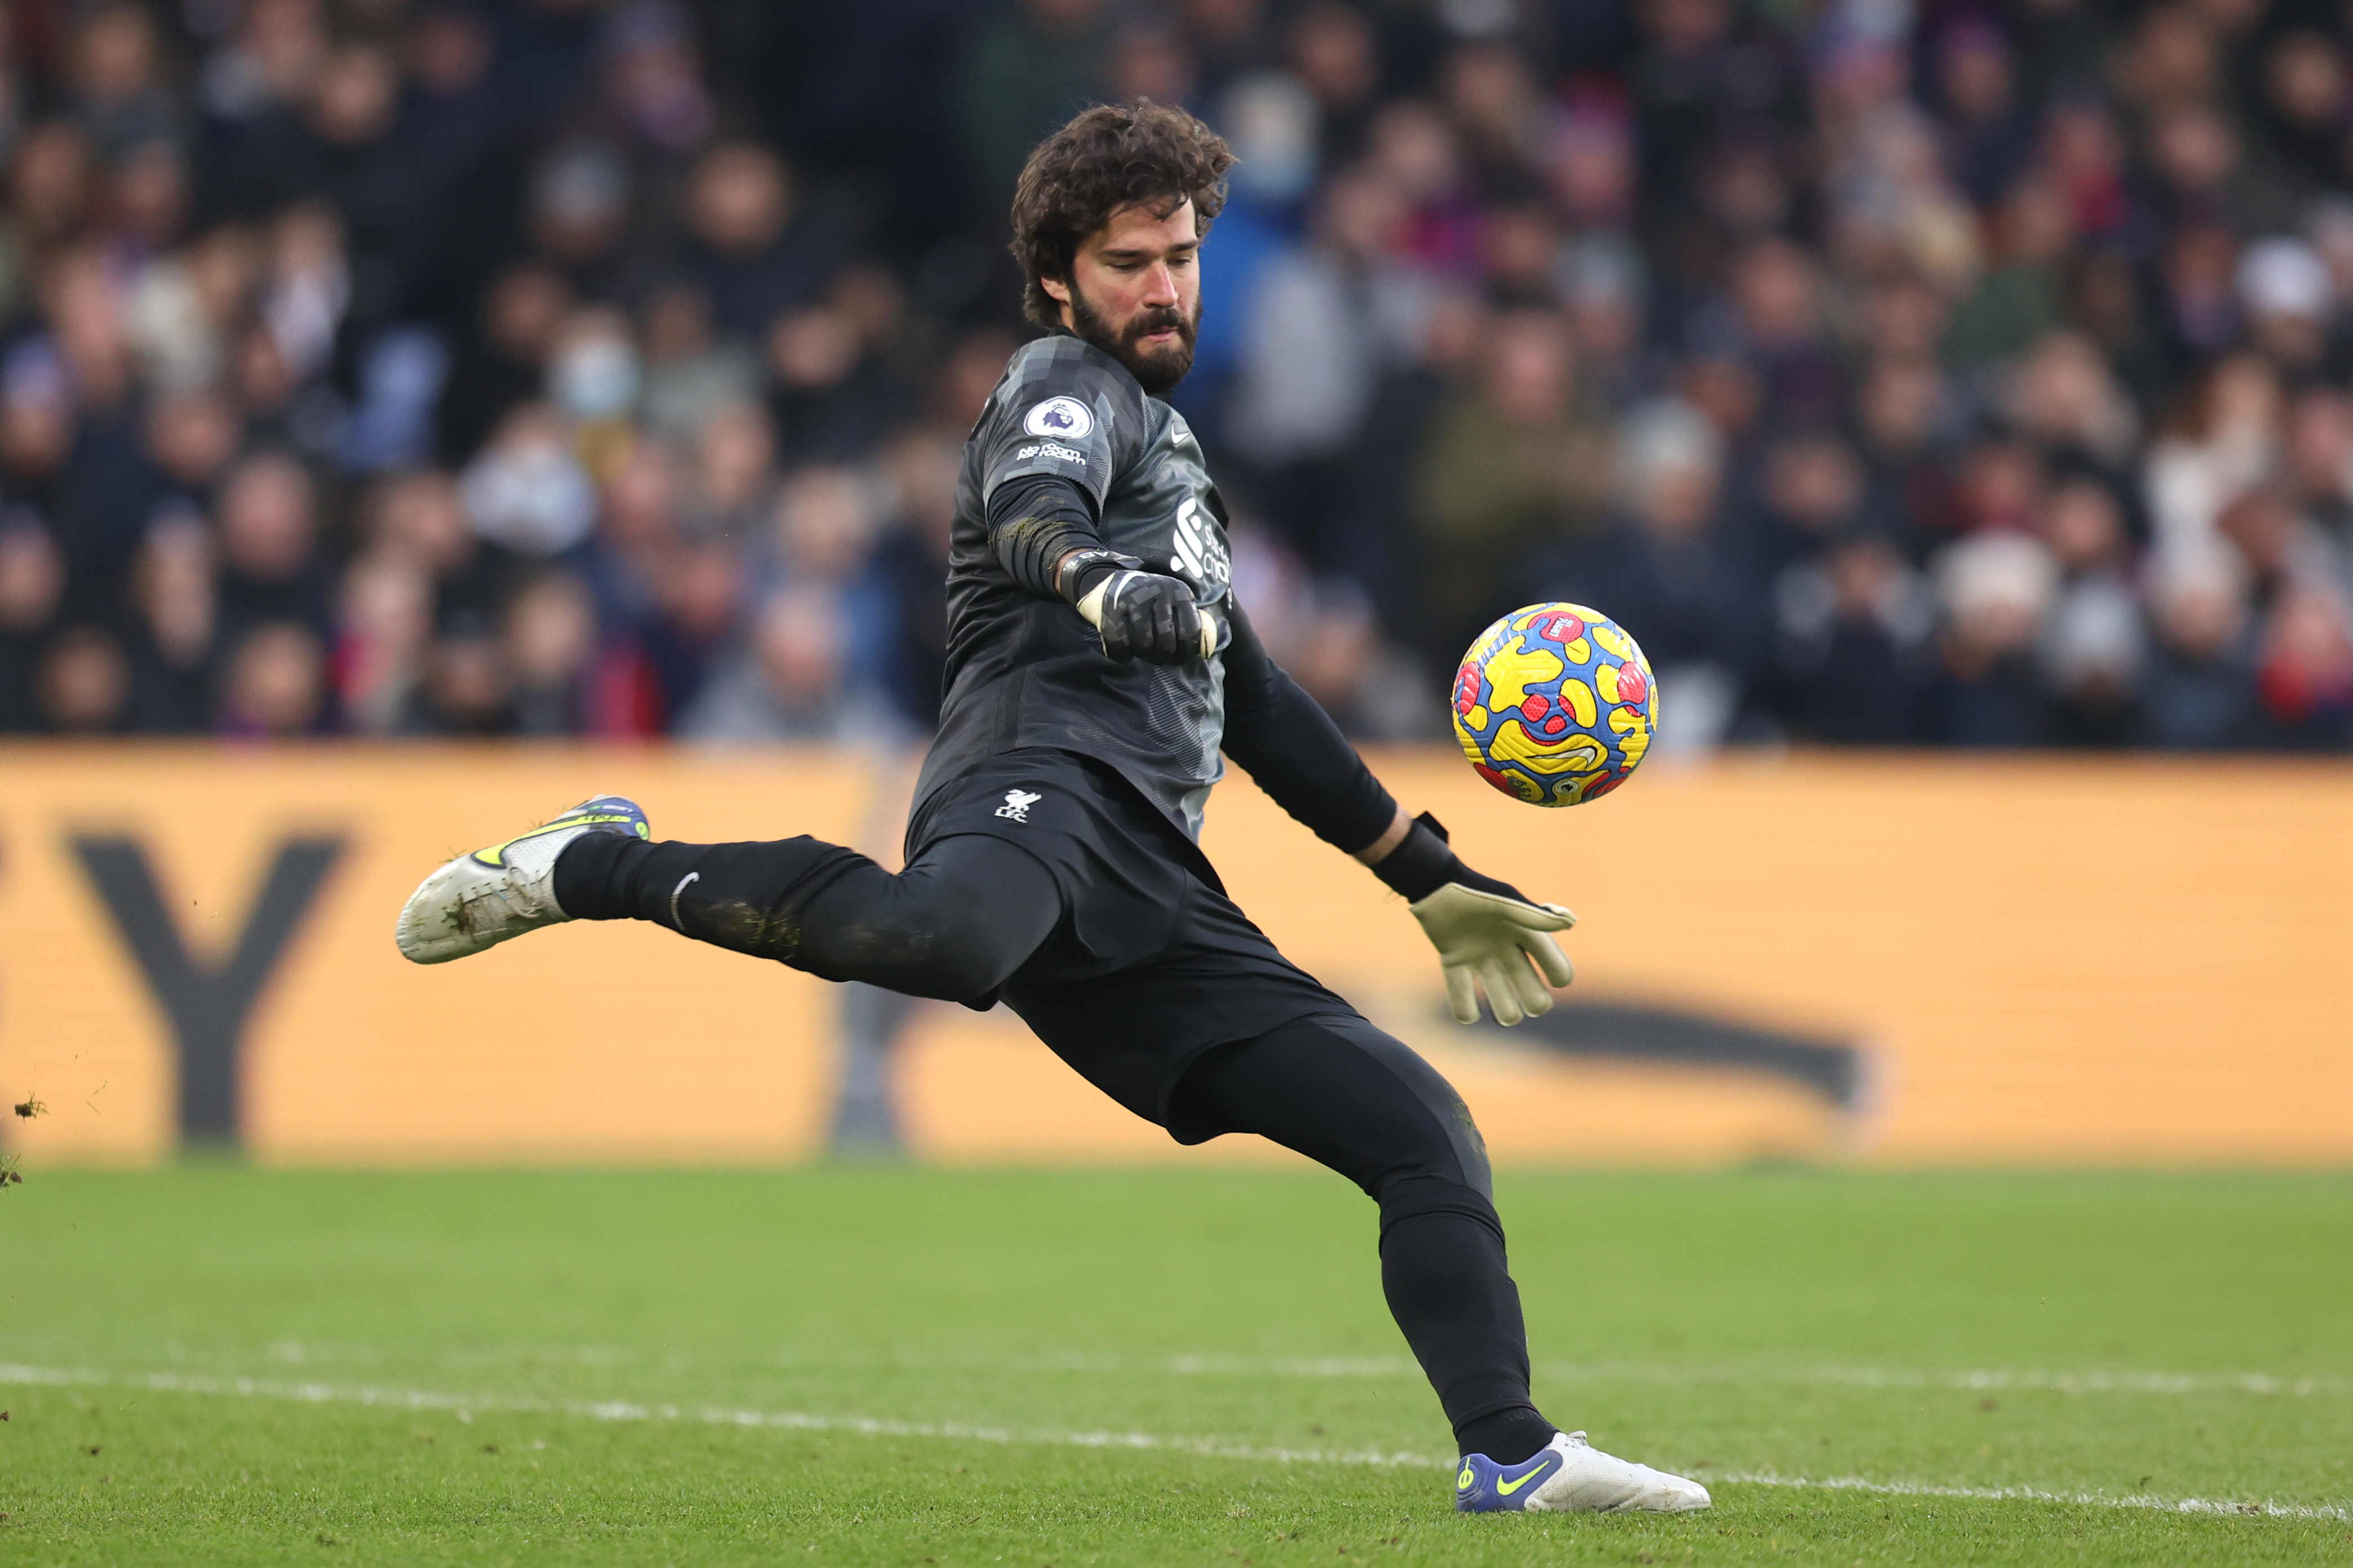 ‘Another exceptional performance’ – BBC pundit highlights importance of Liverpool star after victory over Crystal Palace